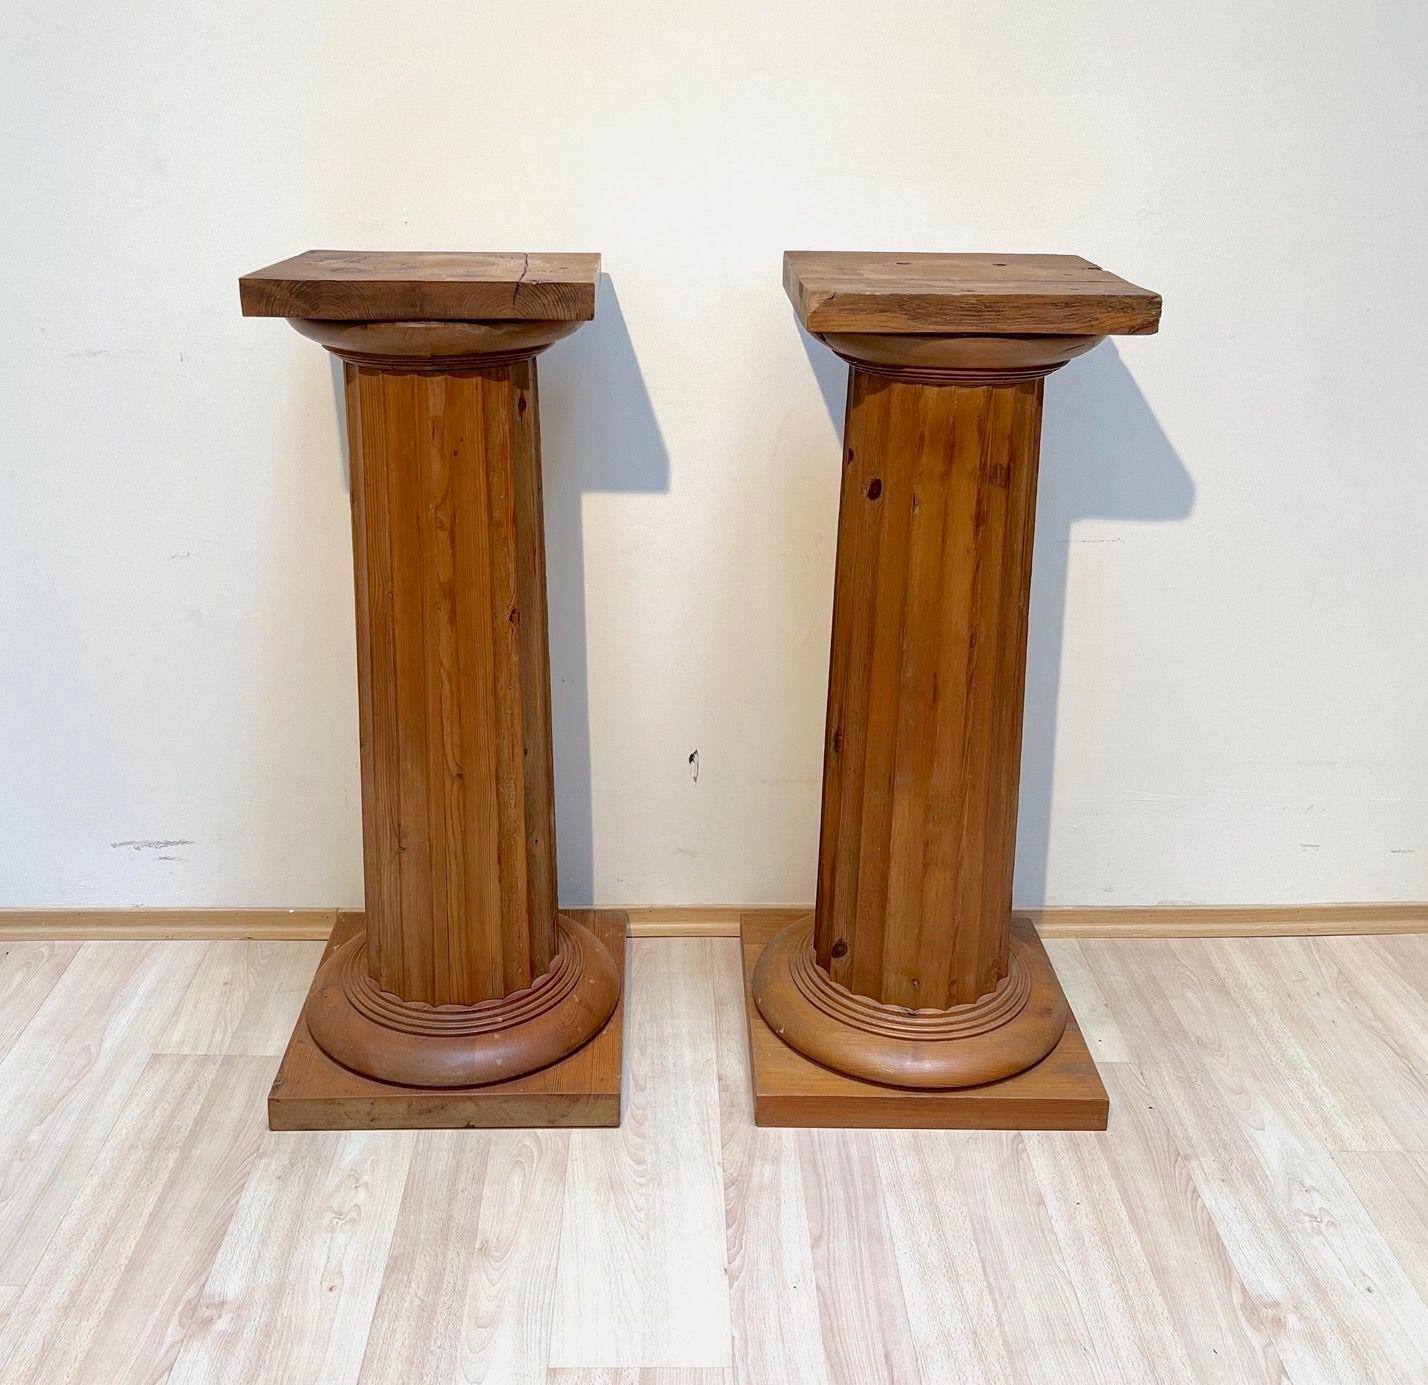 Beautif pair of heavy, neoclassical greek cumns from France, early 20th century, circa 1900-1920. Sid pine soft wood. Strong fluting of the stele. Square cornice and plinth. Doric capitals and bases. Unrestored original condition
Dimensions:
*